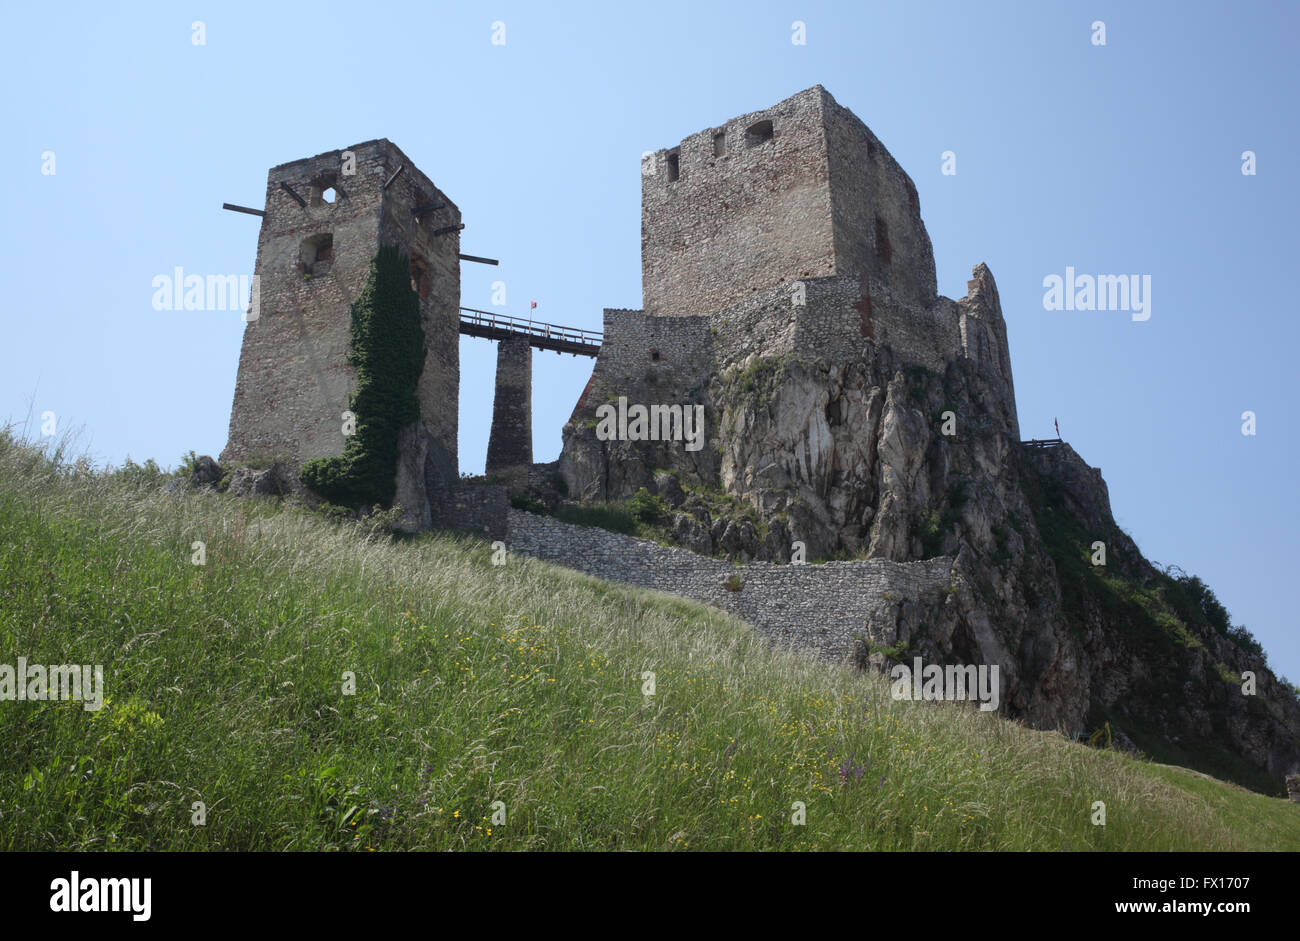 Ruins of the Csesznek castle-fortress in Hungary Stock Photo - Alamy